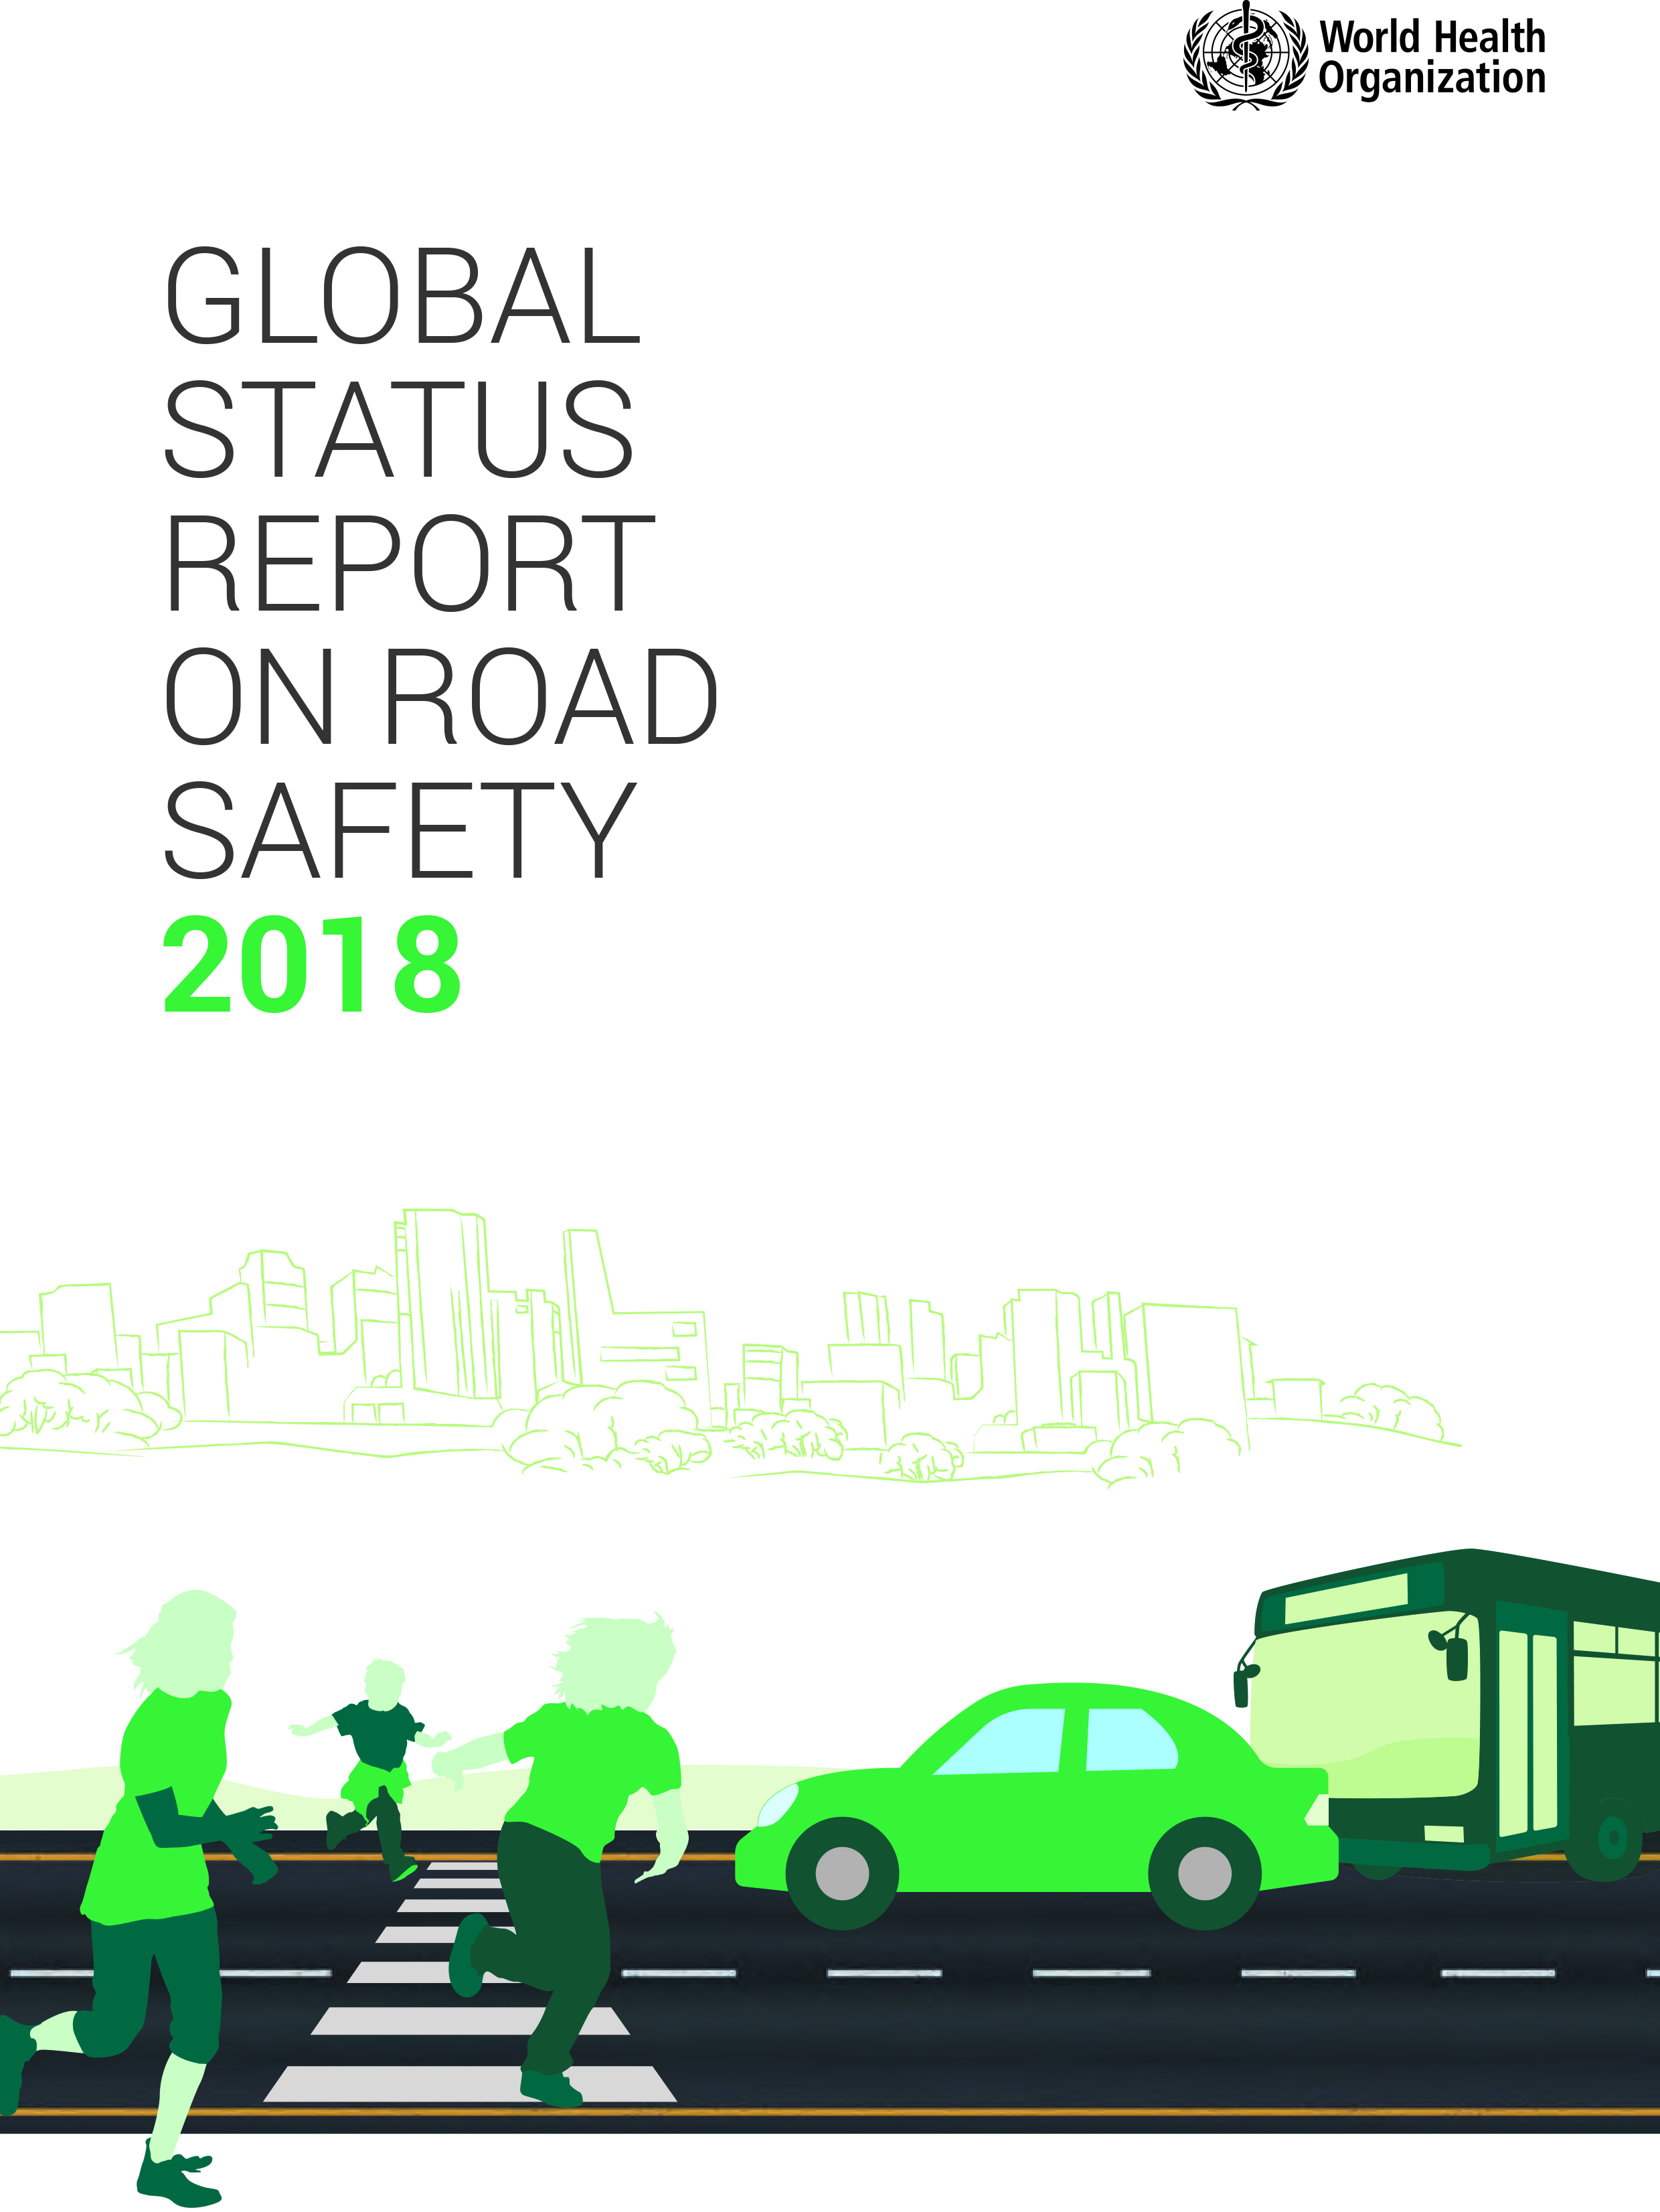 Global Status Report on Road Safety 2018,Global Status Report on Road Safety 2018,Global Status Report on Road Safety 2018